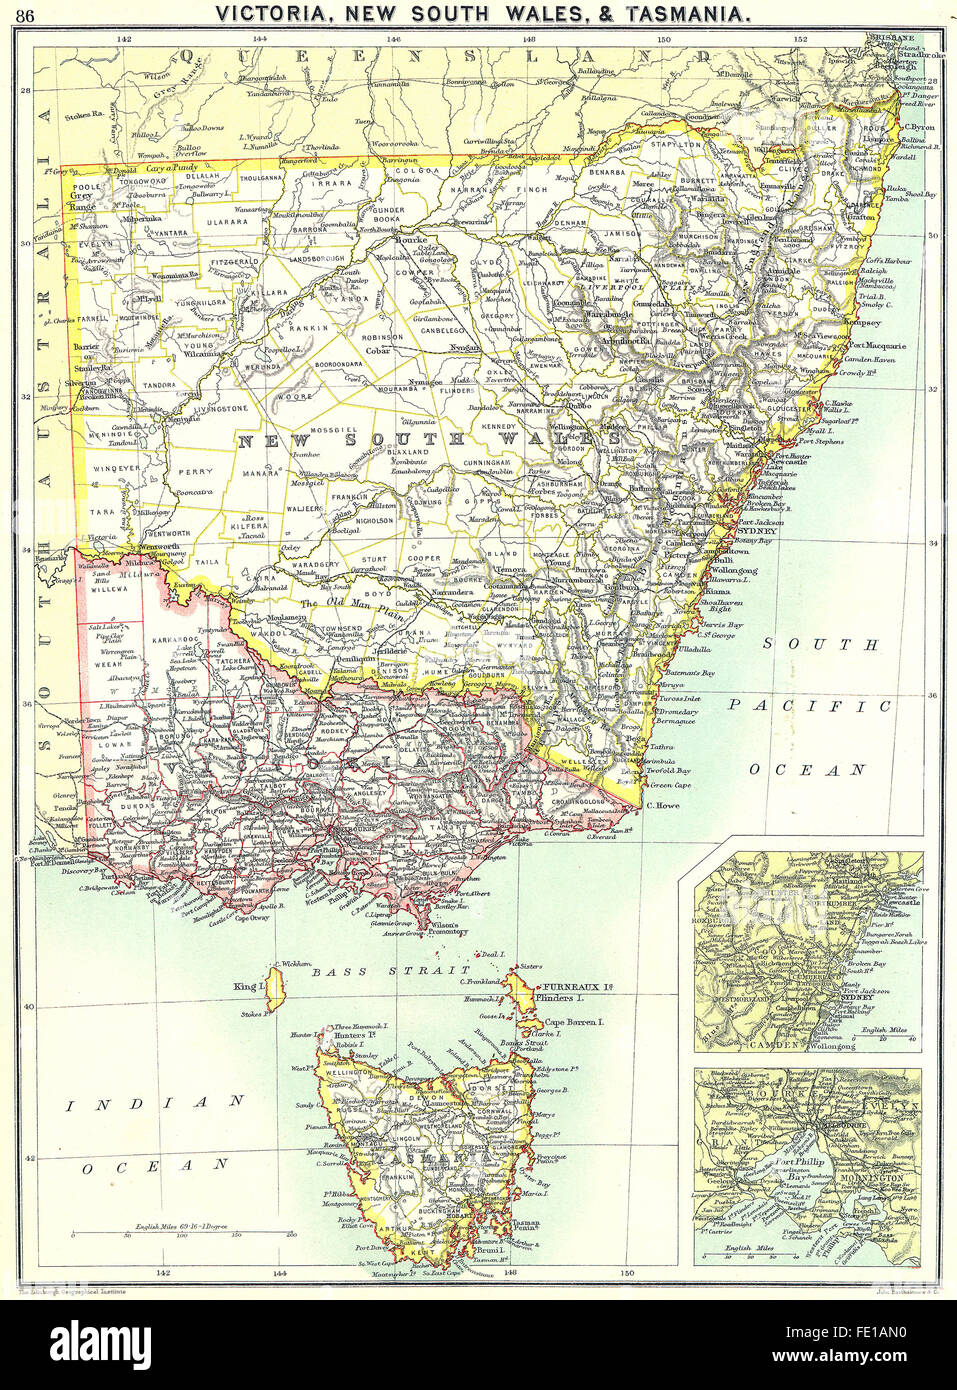 map of nsw and victoria Nsw Victoria Tasmania Sydney Mornington 1900 Antique Map Stock Photo Alamy map of nsw and victoria